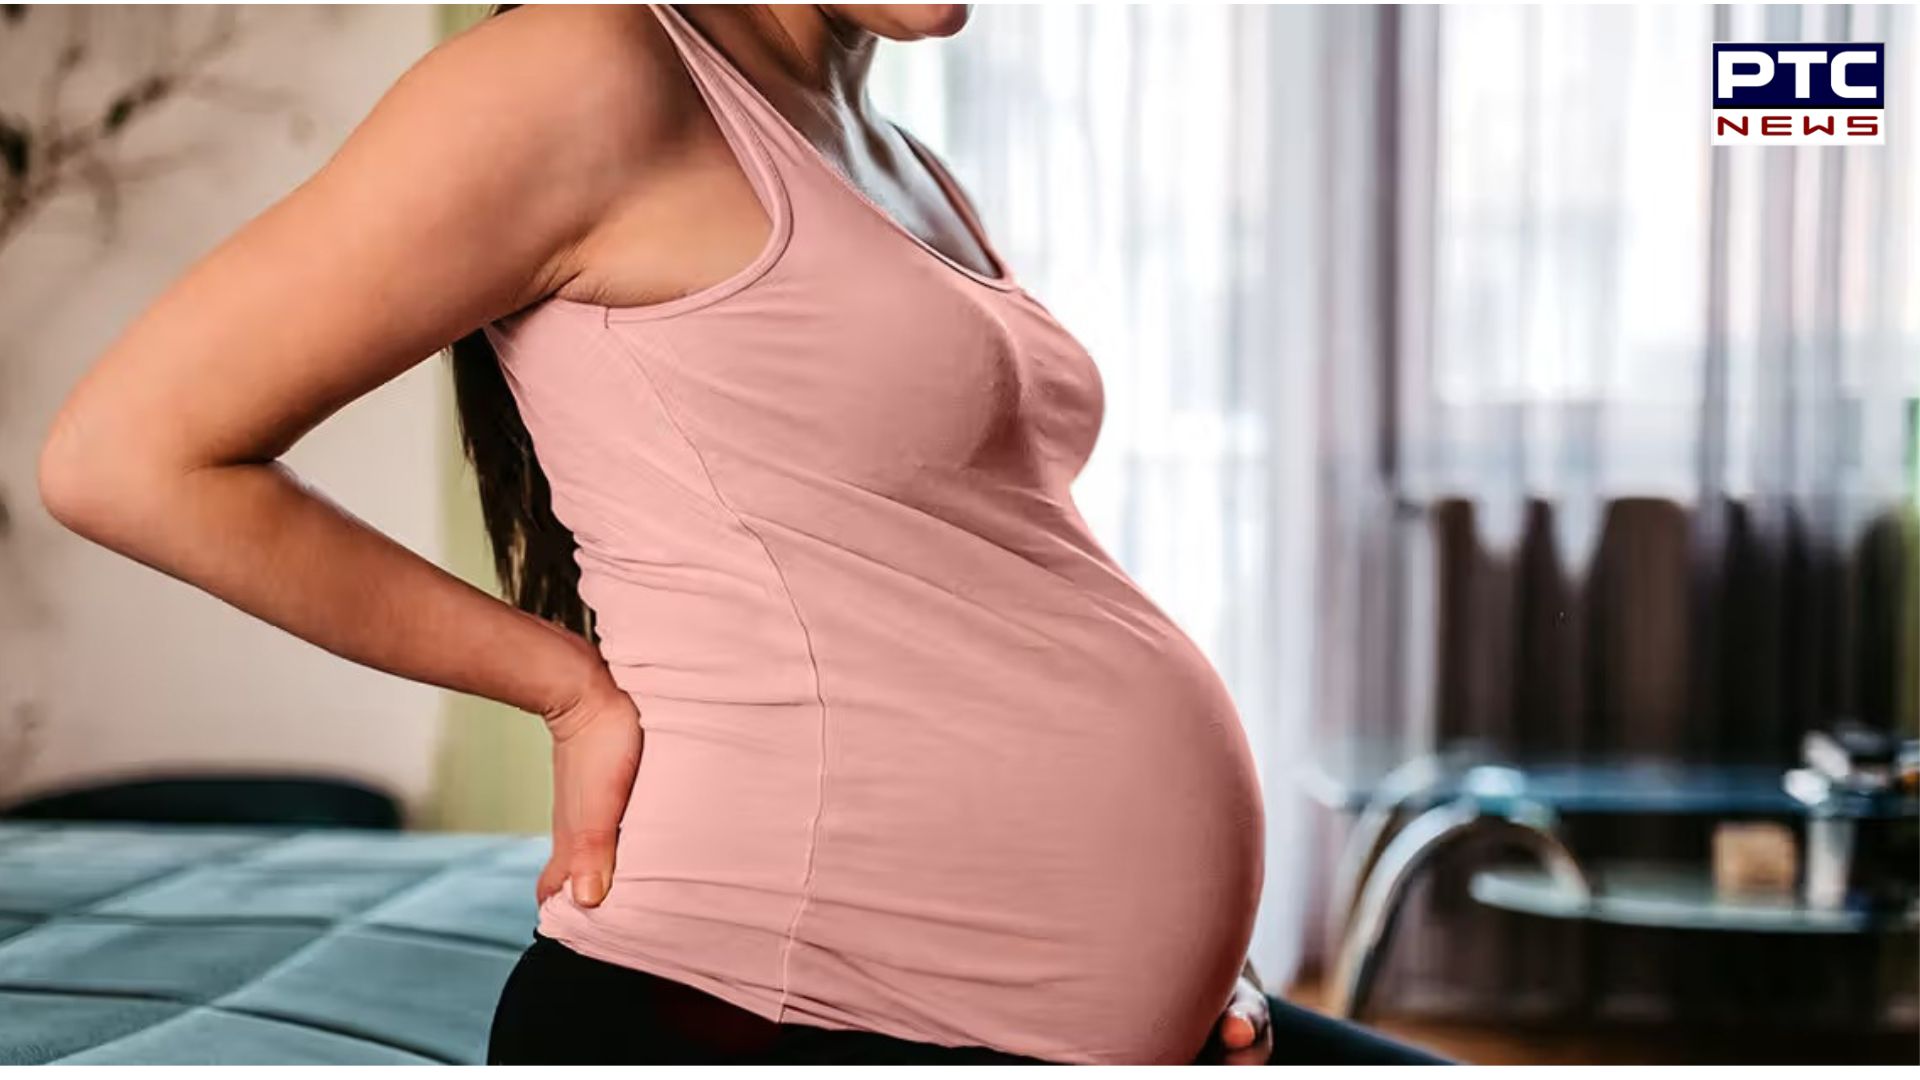 Pregnancy complications can impact child's health later in life, claims study